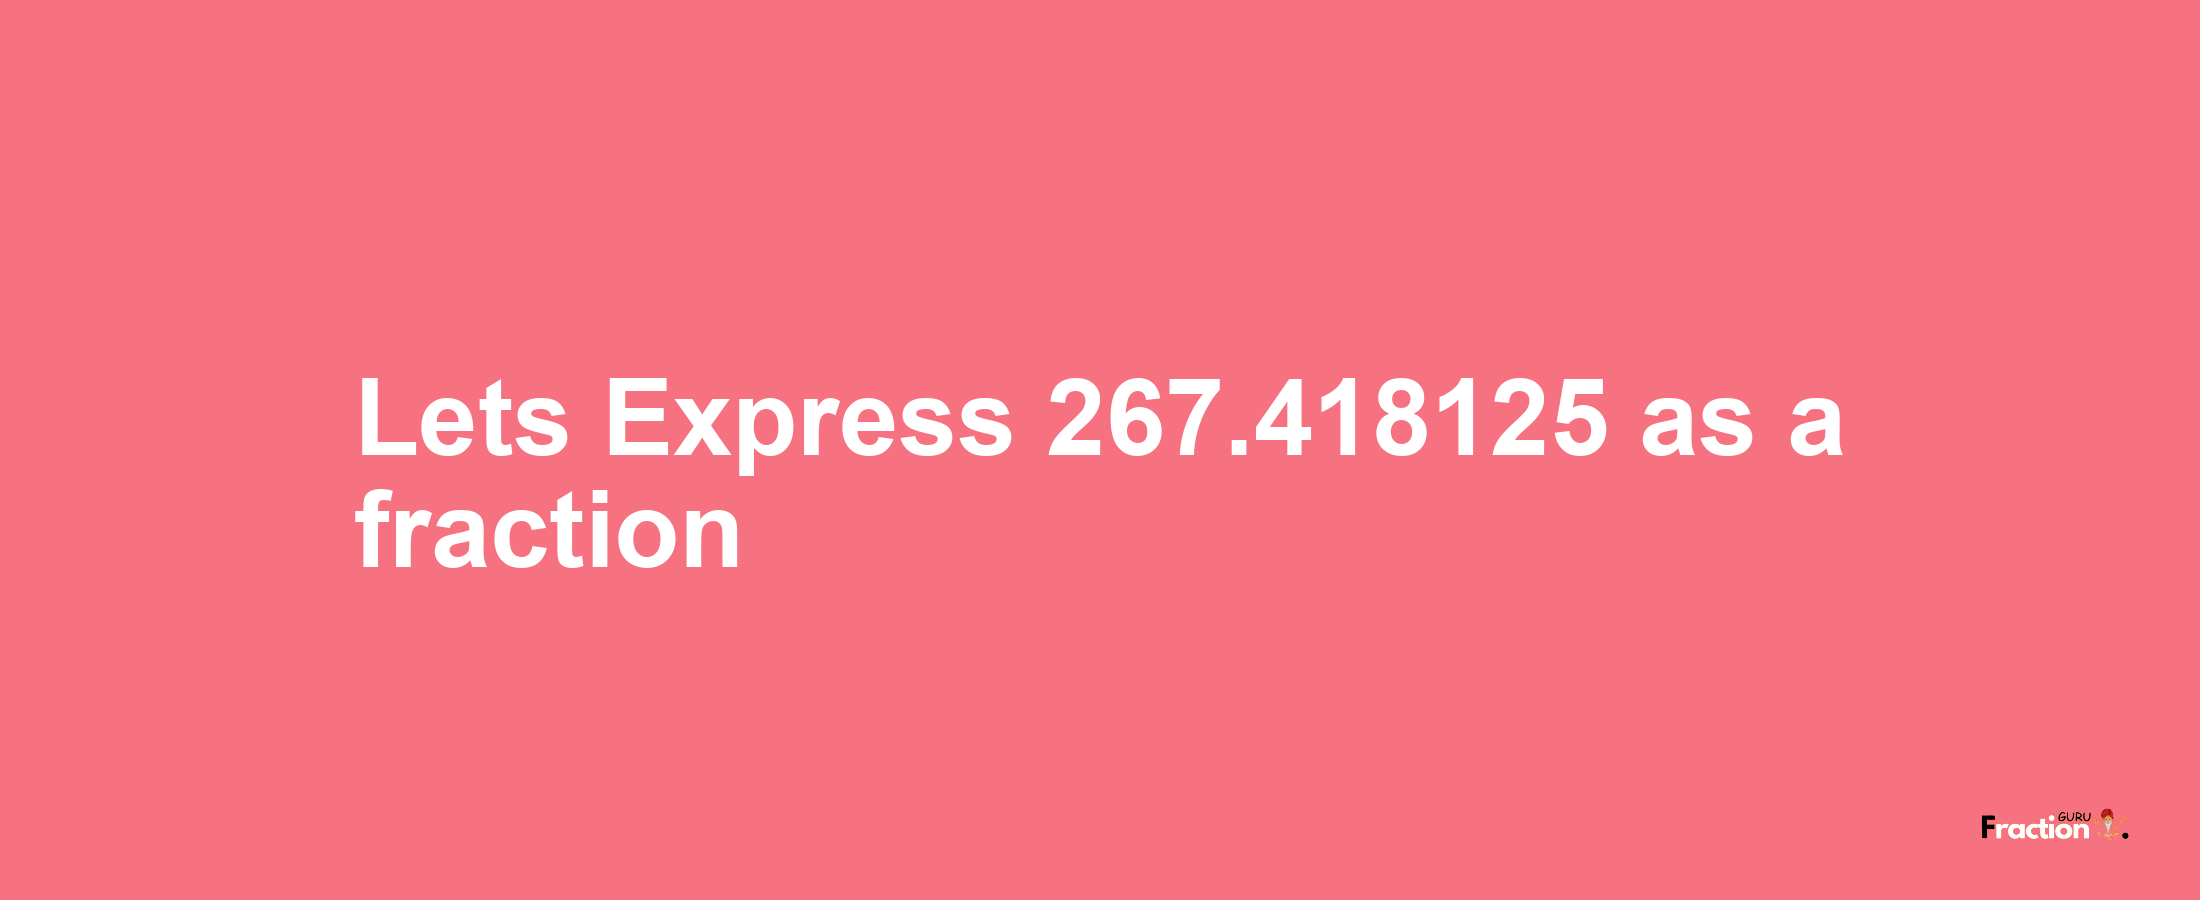 Lets Express 267.418125 as afraction